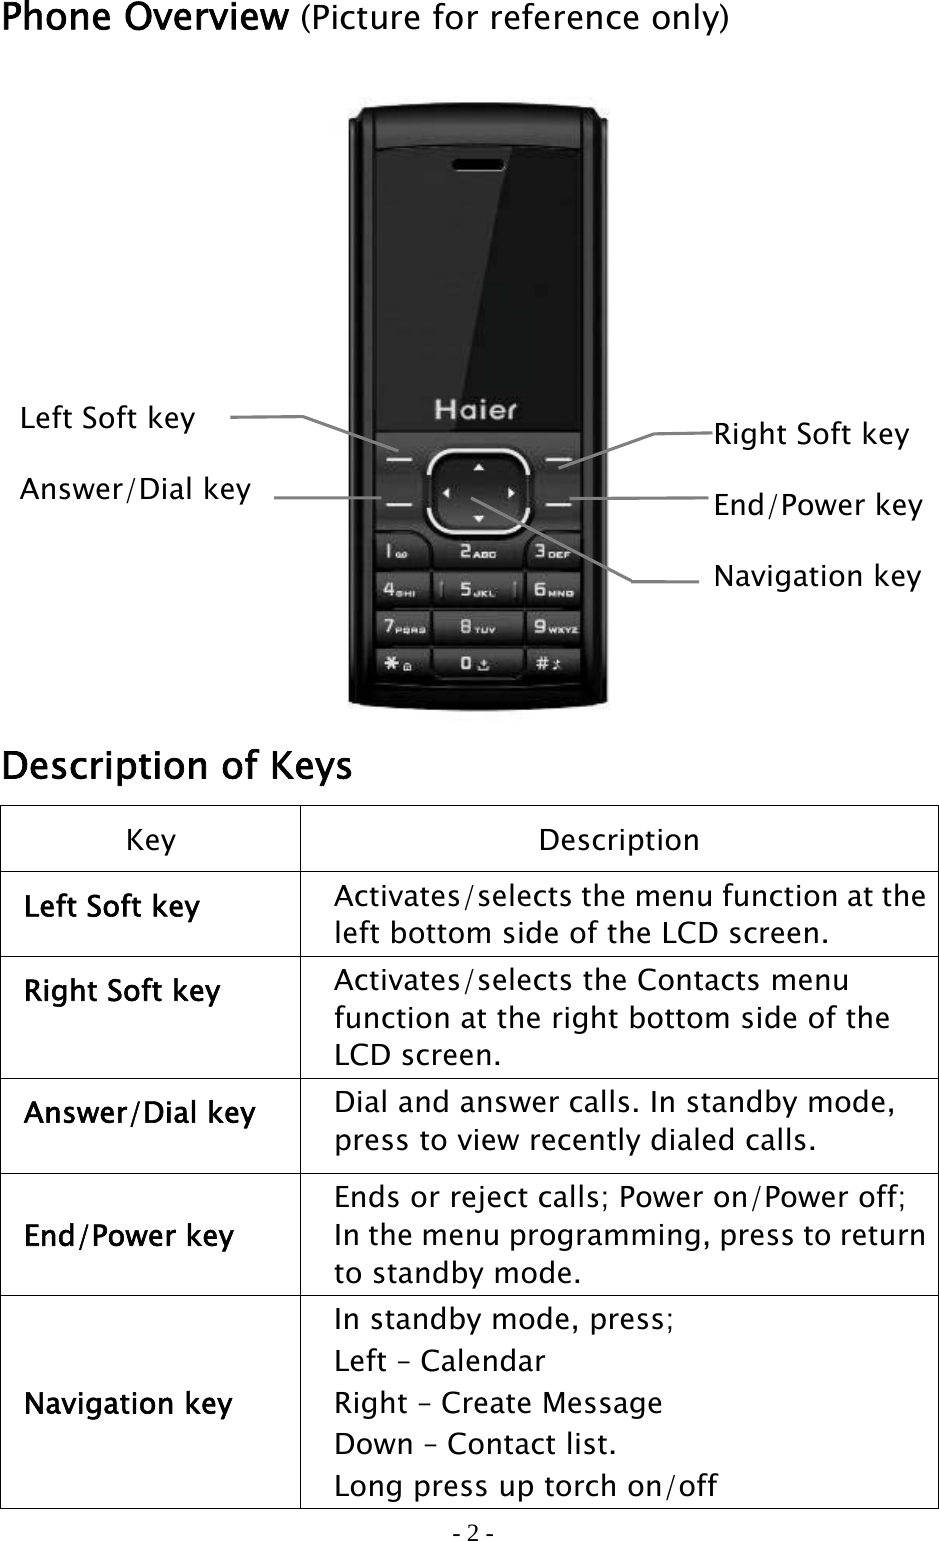 - 2 - Phone Overview (Picture for reference only)  Description of Keys Key Description Left Soft key  Activates/selects the menu function at the left bottom side of the LCD screen. Right Soft key Activates/selects the Contacts menu function at the right bottom side of the LCD screen. Answer/Dial key Dial and answer calls. In standby mode, press to view recently dialed calls. End/Power key Ends or reject calls; Power on/Power off; In the menu programming, press to return to standby mode. Navigation key In standby mode, press; Left – Calendar Right – Create Message Down – Contact list. Long press up torch on/off Left Soft key Answer/Dial key Right Soft keyEnd/Power keyNavigation key